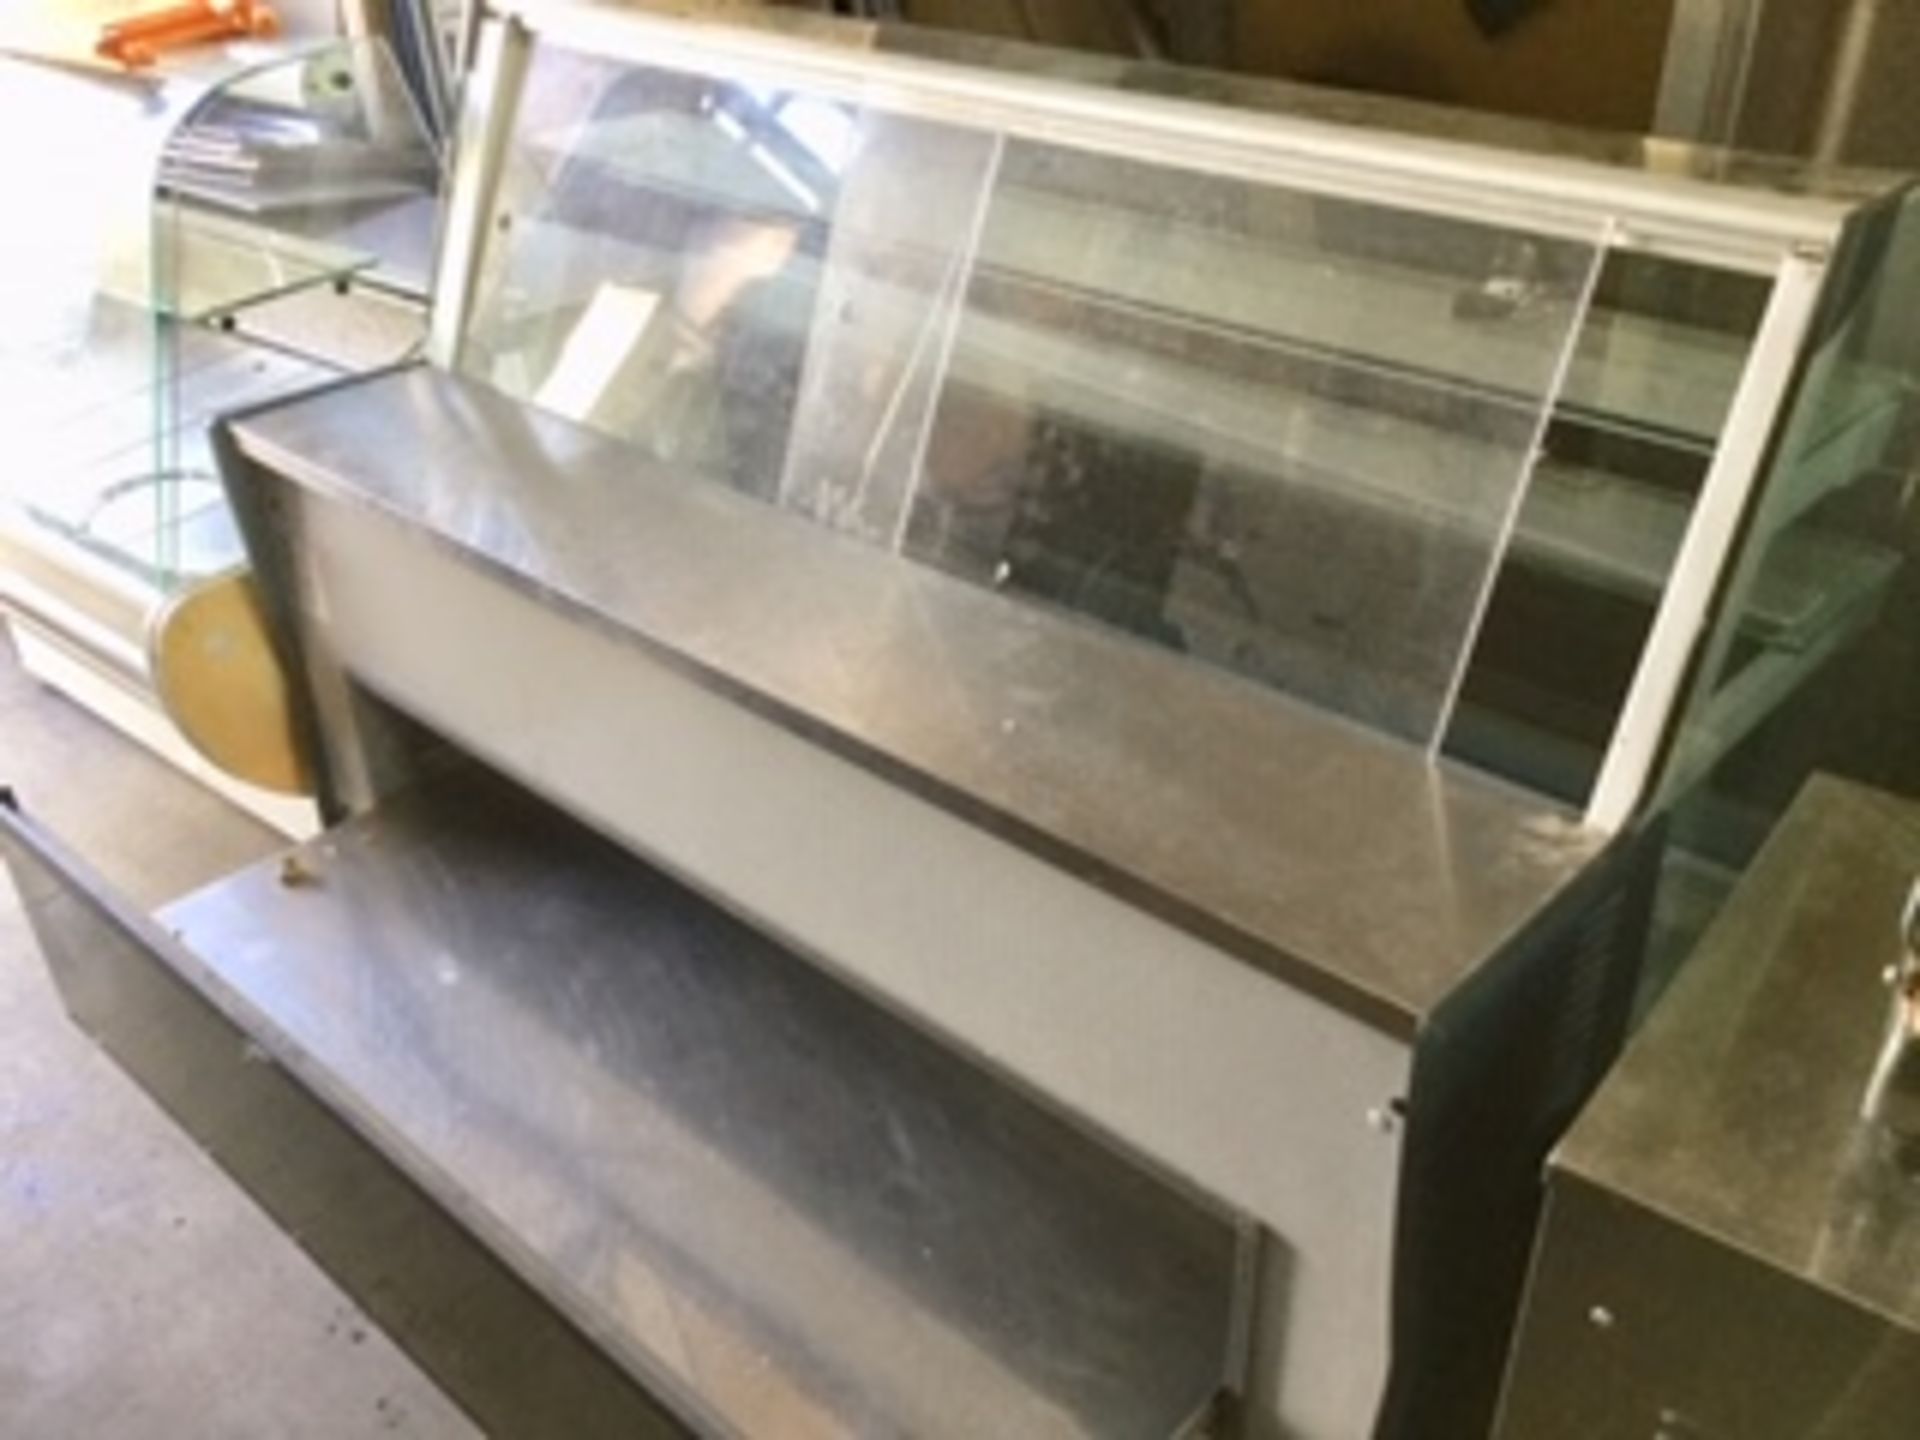 Refrigerated Patisserie Display Case – Three shelves pus the base   Pull Out Rear Drawer for loading - Image 2 of 2